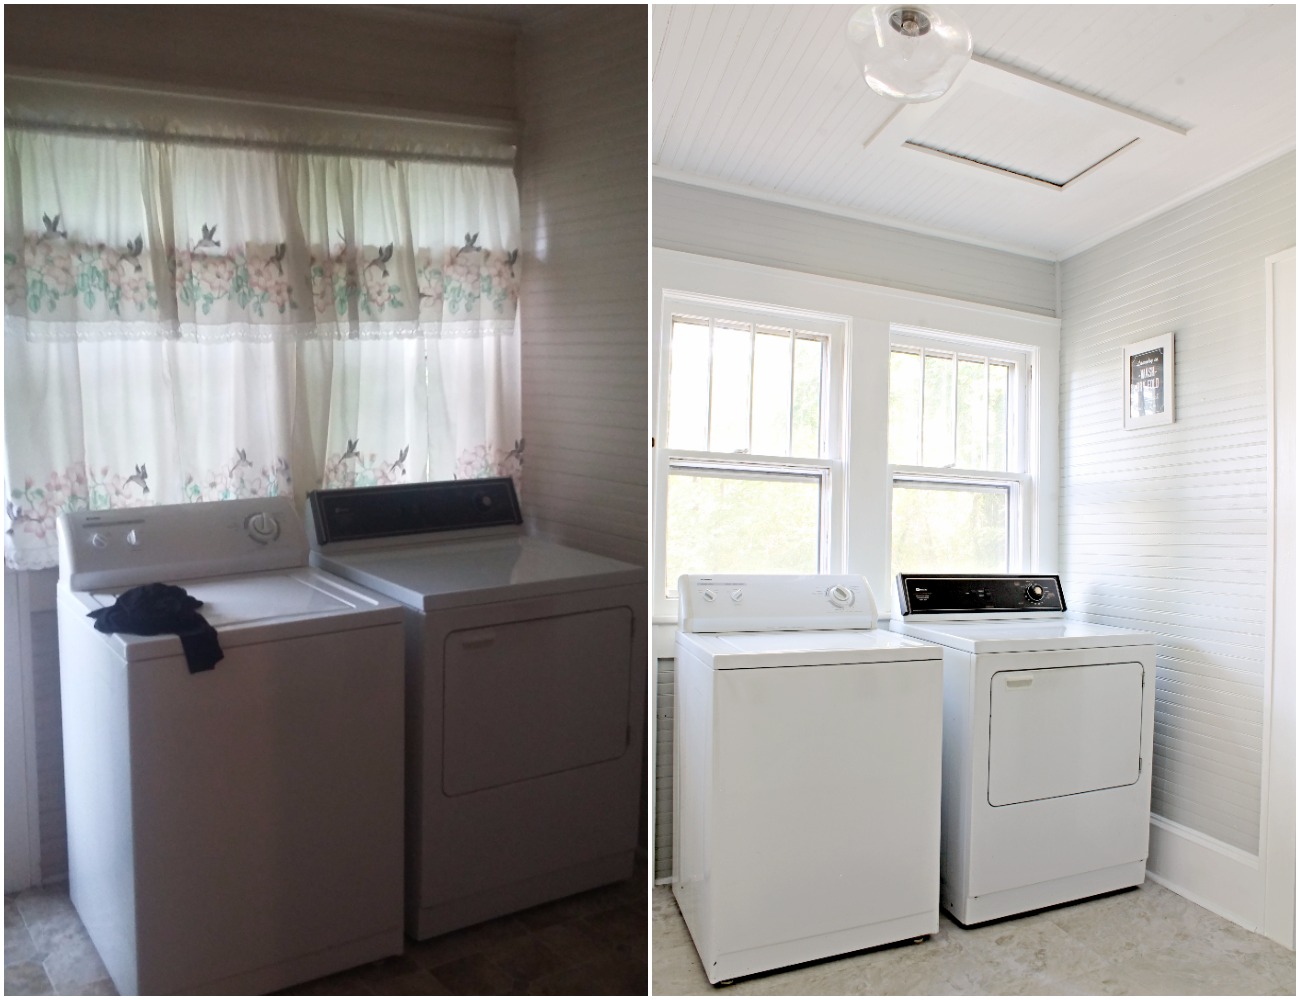 House Flipping Before and Afters - DIY BUDGET LAUNDRY ROOM MUD ROOM IDEAS 1.jpg